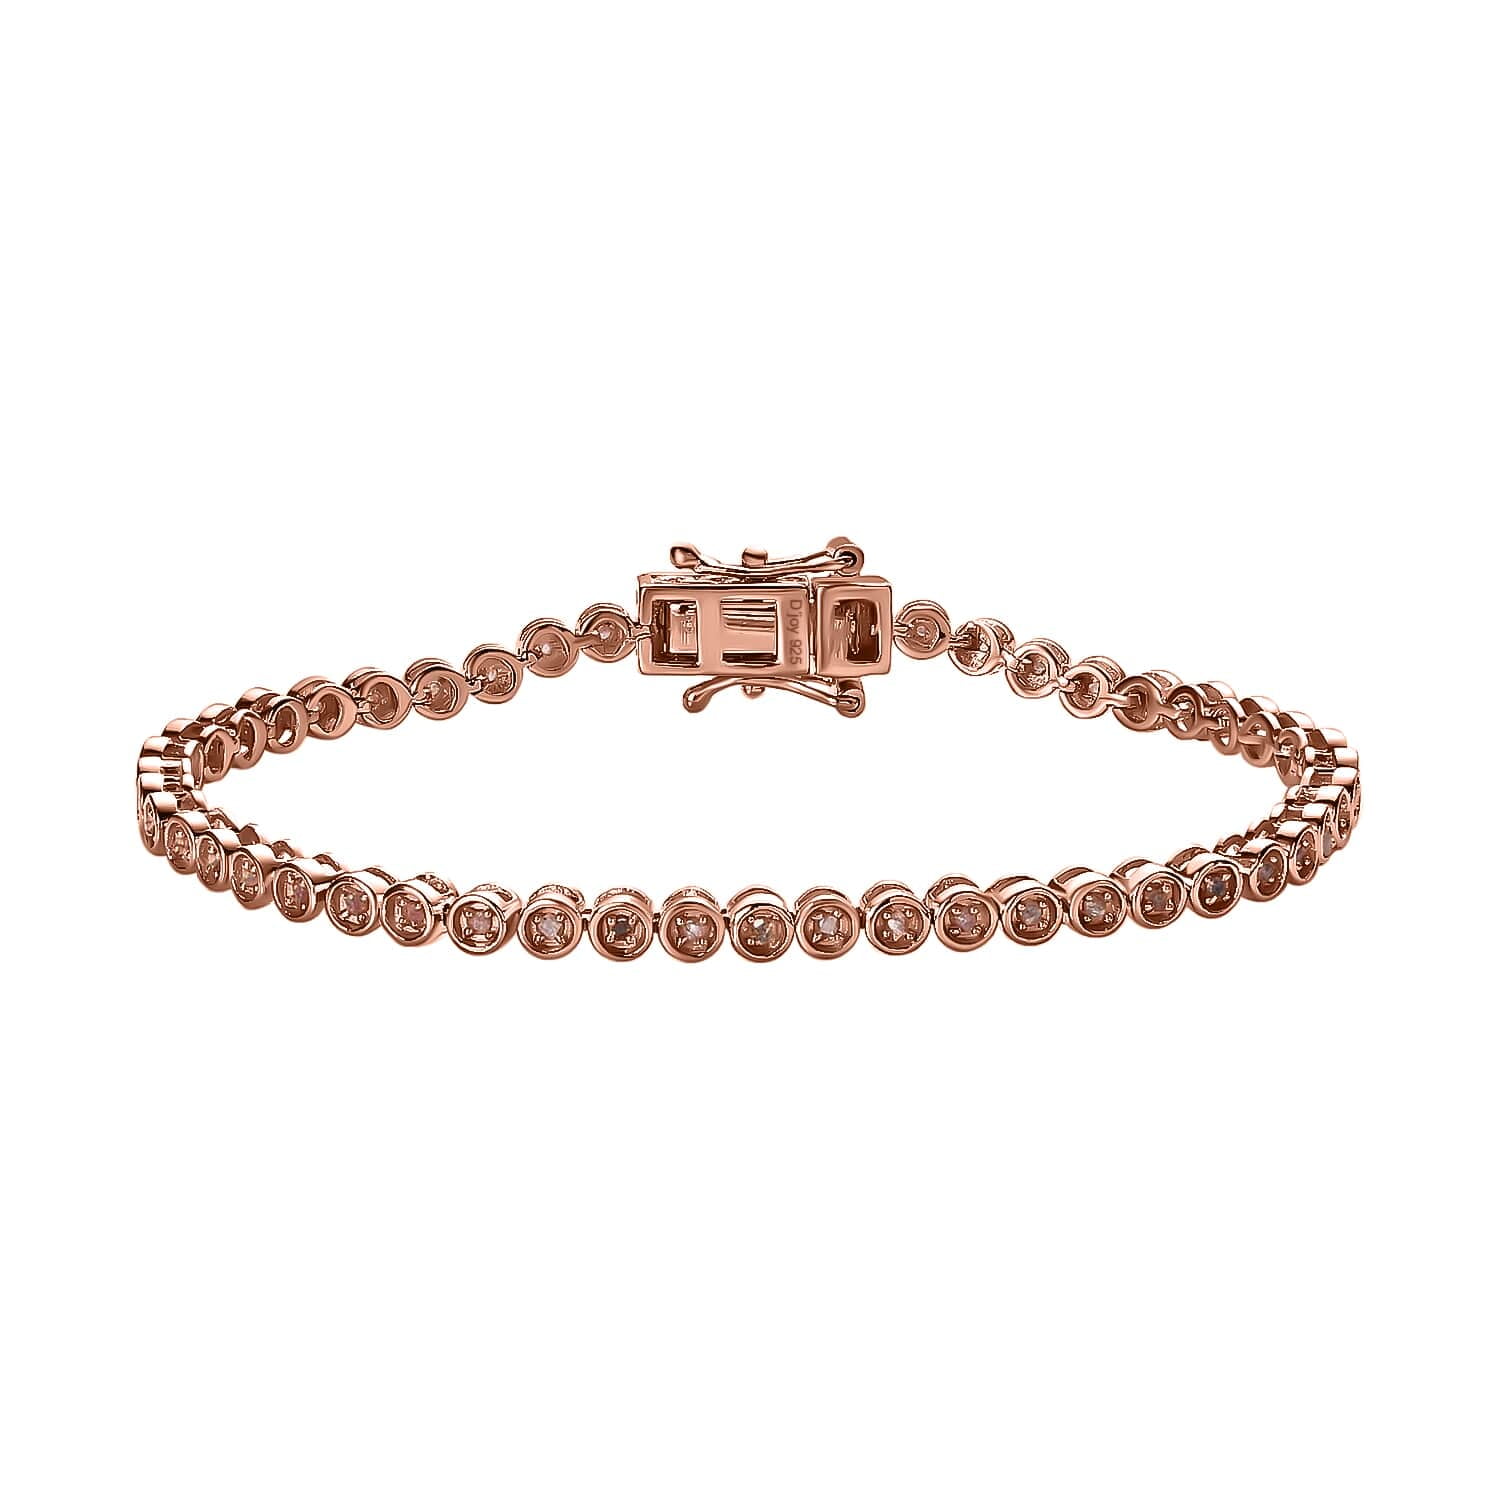 Shop LC Pink Diamond Round 925 Sterling Silver Vermeil Rose Gold Plated  Tennis Bracelet for Women Size 6.5\